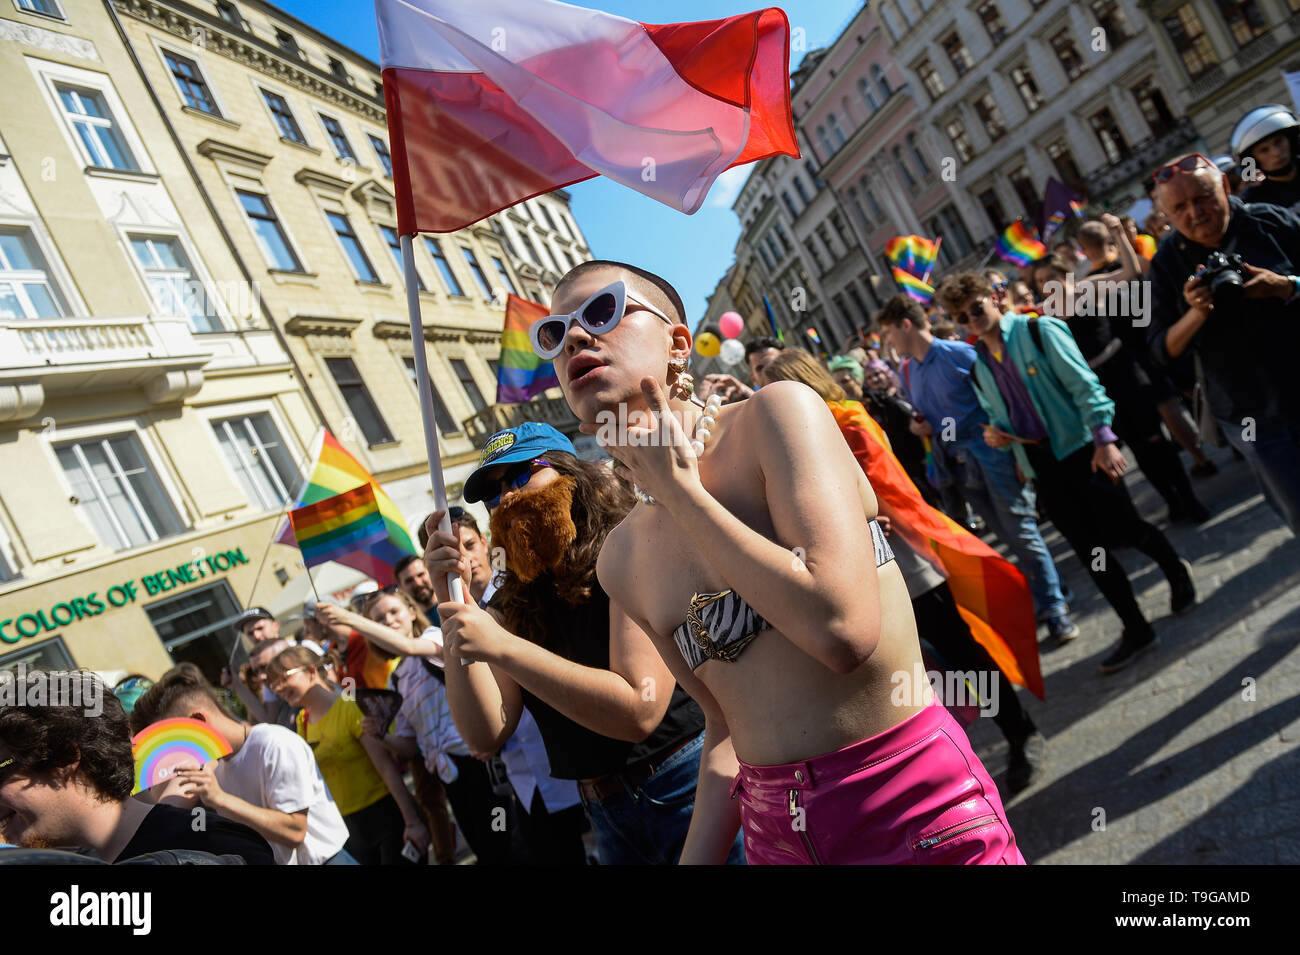 A man seen wearing woman clothes during the 15th Equality Parade rally in  support of the LGBT community. During the pro LGBT parade route, several  protests against LGBT rights and promoting pro